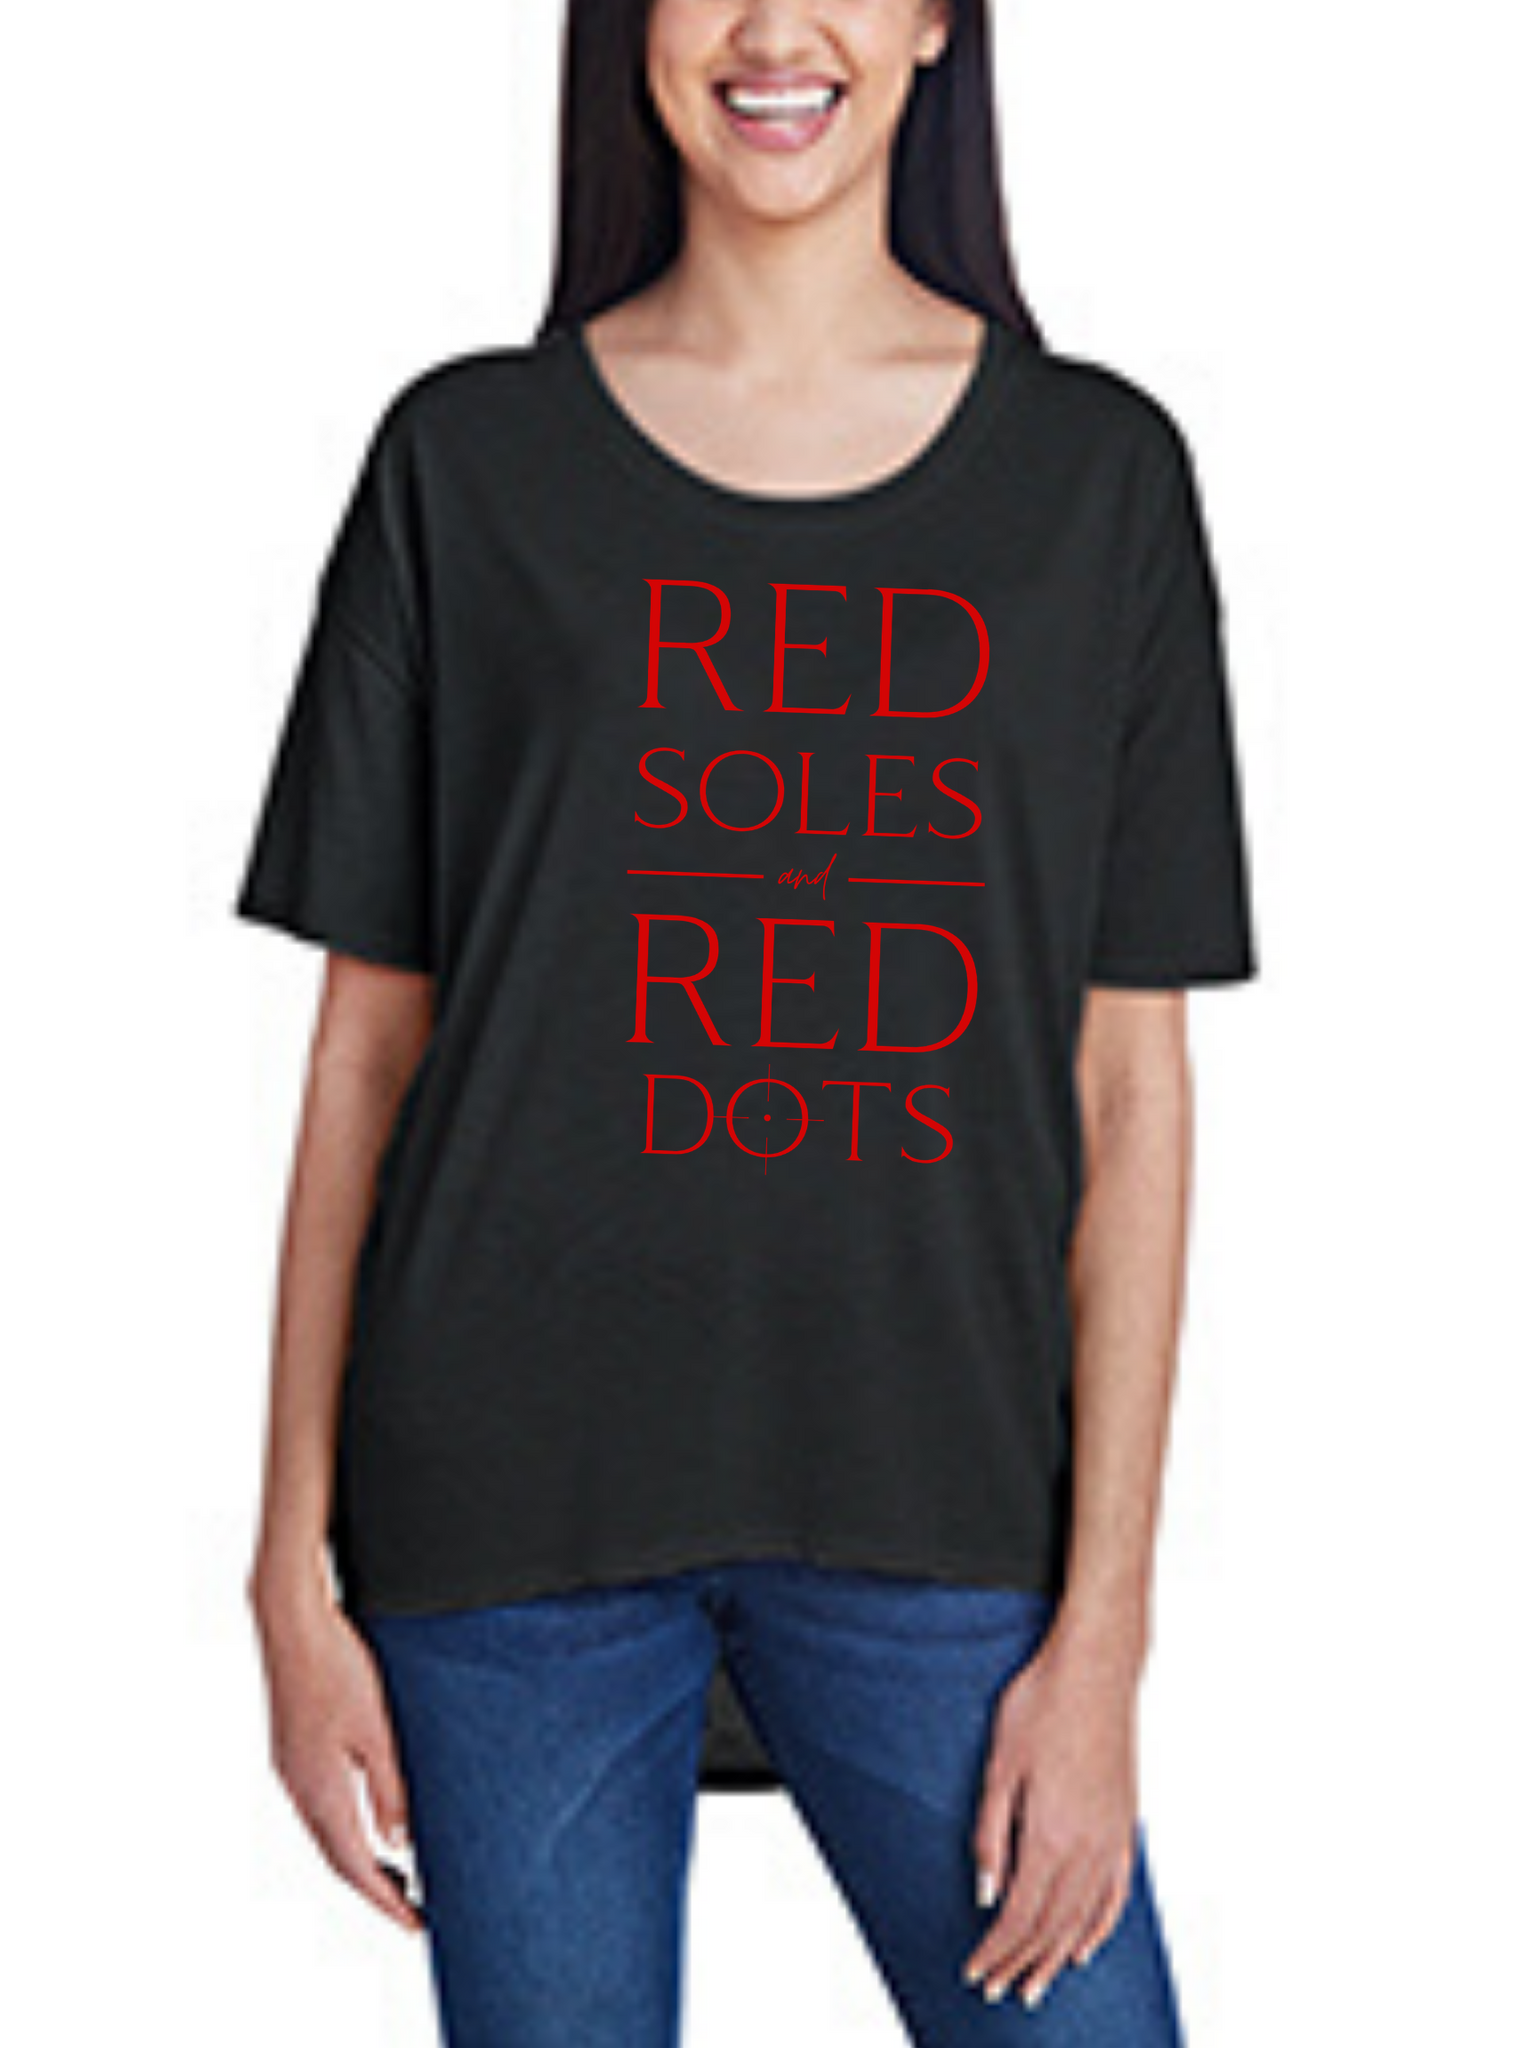 Red Soles and Red Dots, Women's Hi-Lo Freedom Shirt